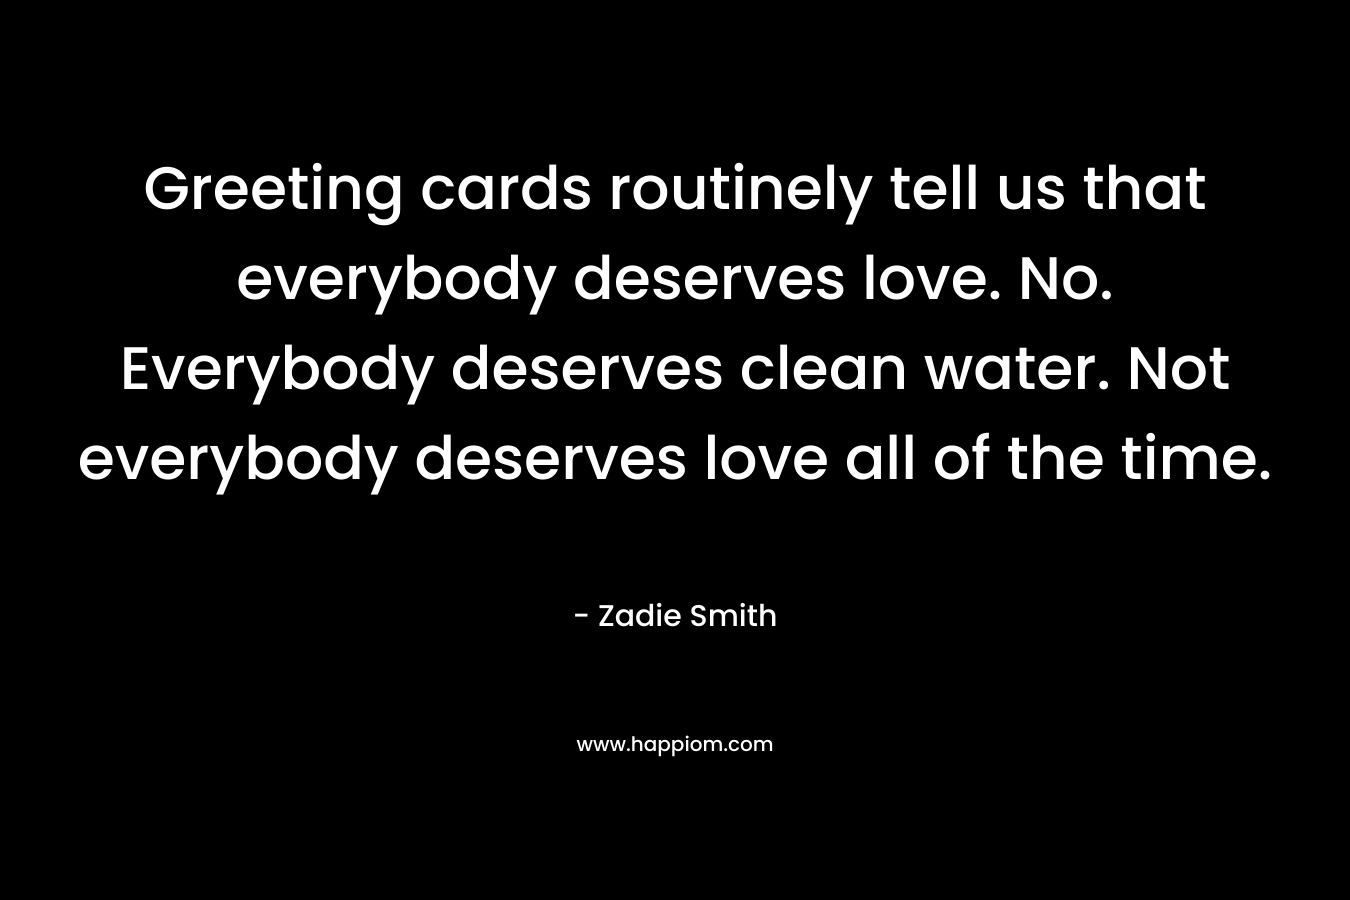 Greeting cards routinely tell us that everybody deserves love. No. Everybody deserves clean water. Not everybody deserves love all of the time. – Zadie Smith